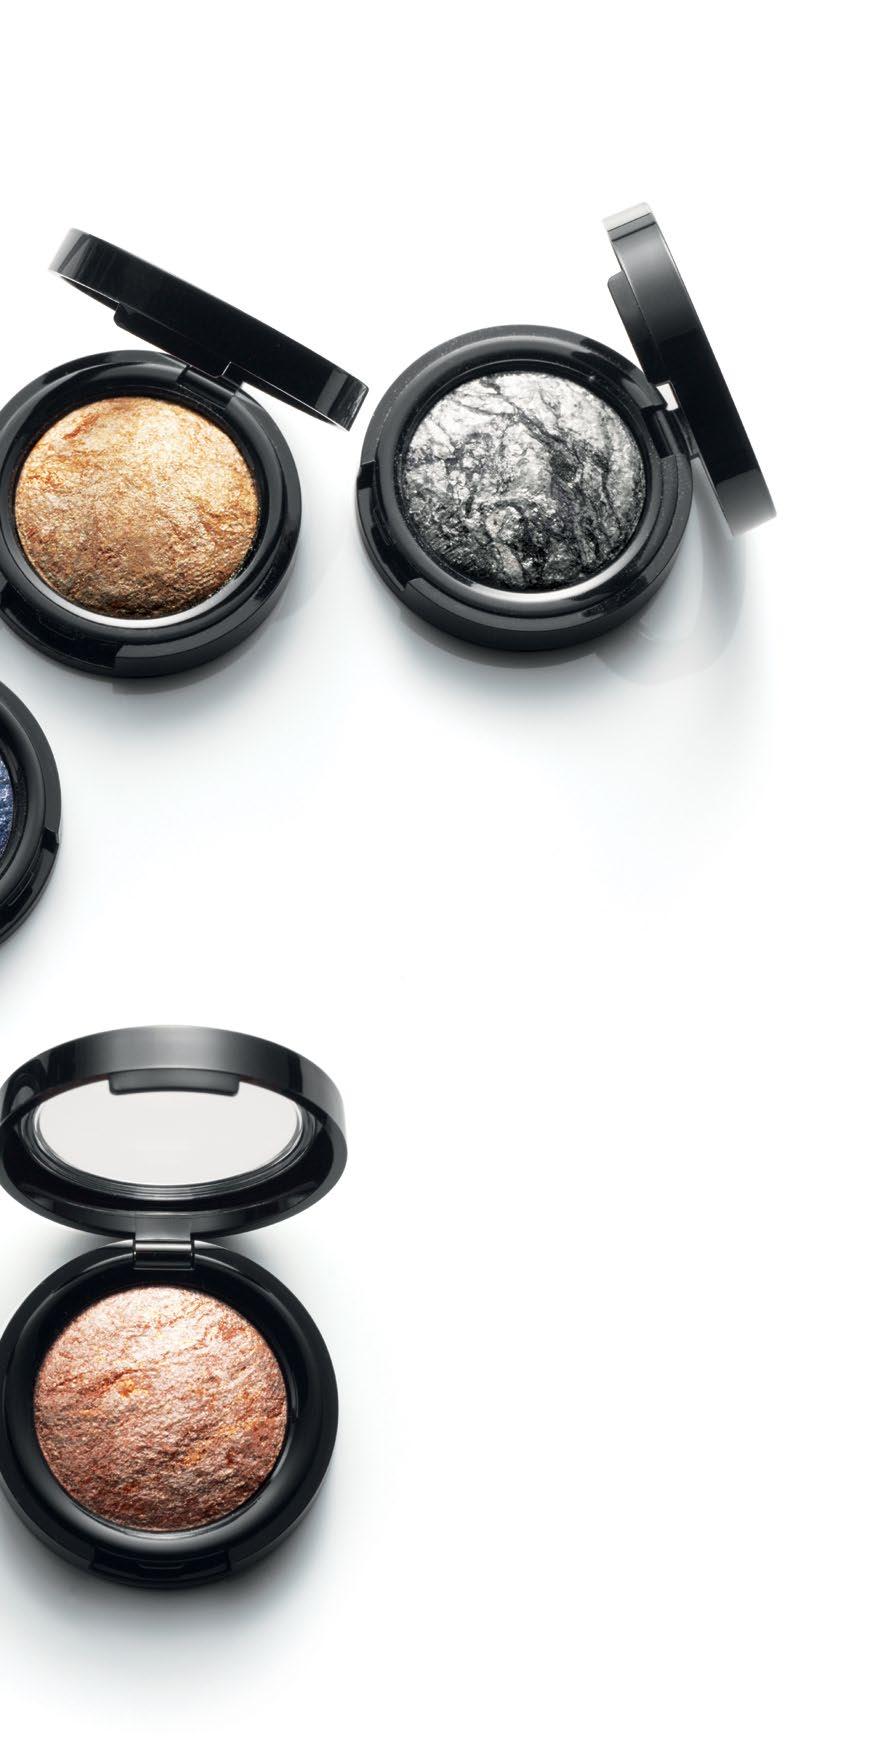 Summer nights 2 3 For eyes that are out of this world With Minerals and concentrated colour pigments, Marbleyes Eyeshadow gives you ultimate colour control.